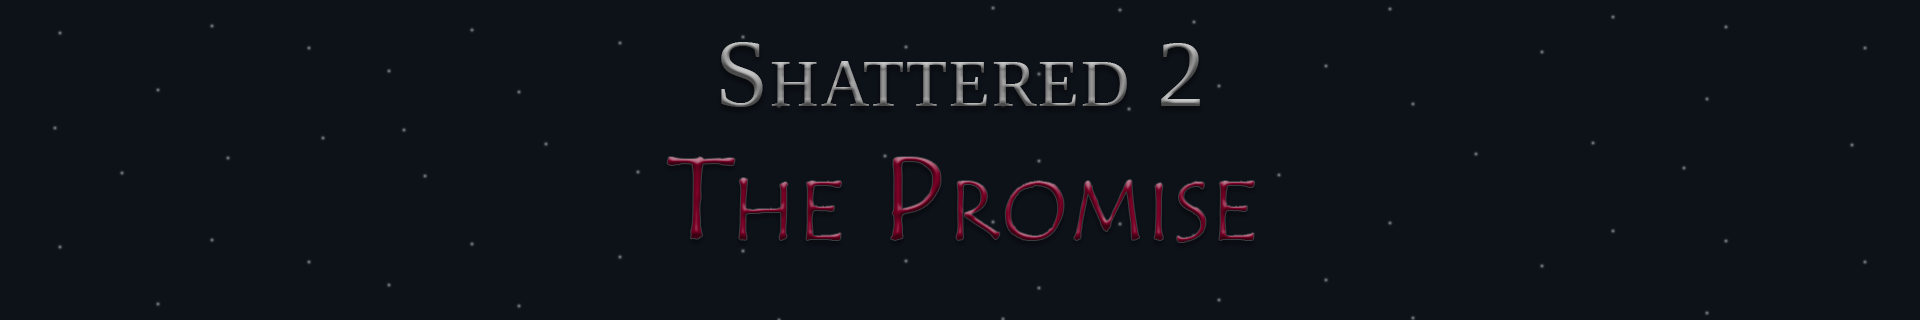 Shattered 2 - The Promise